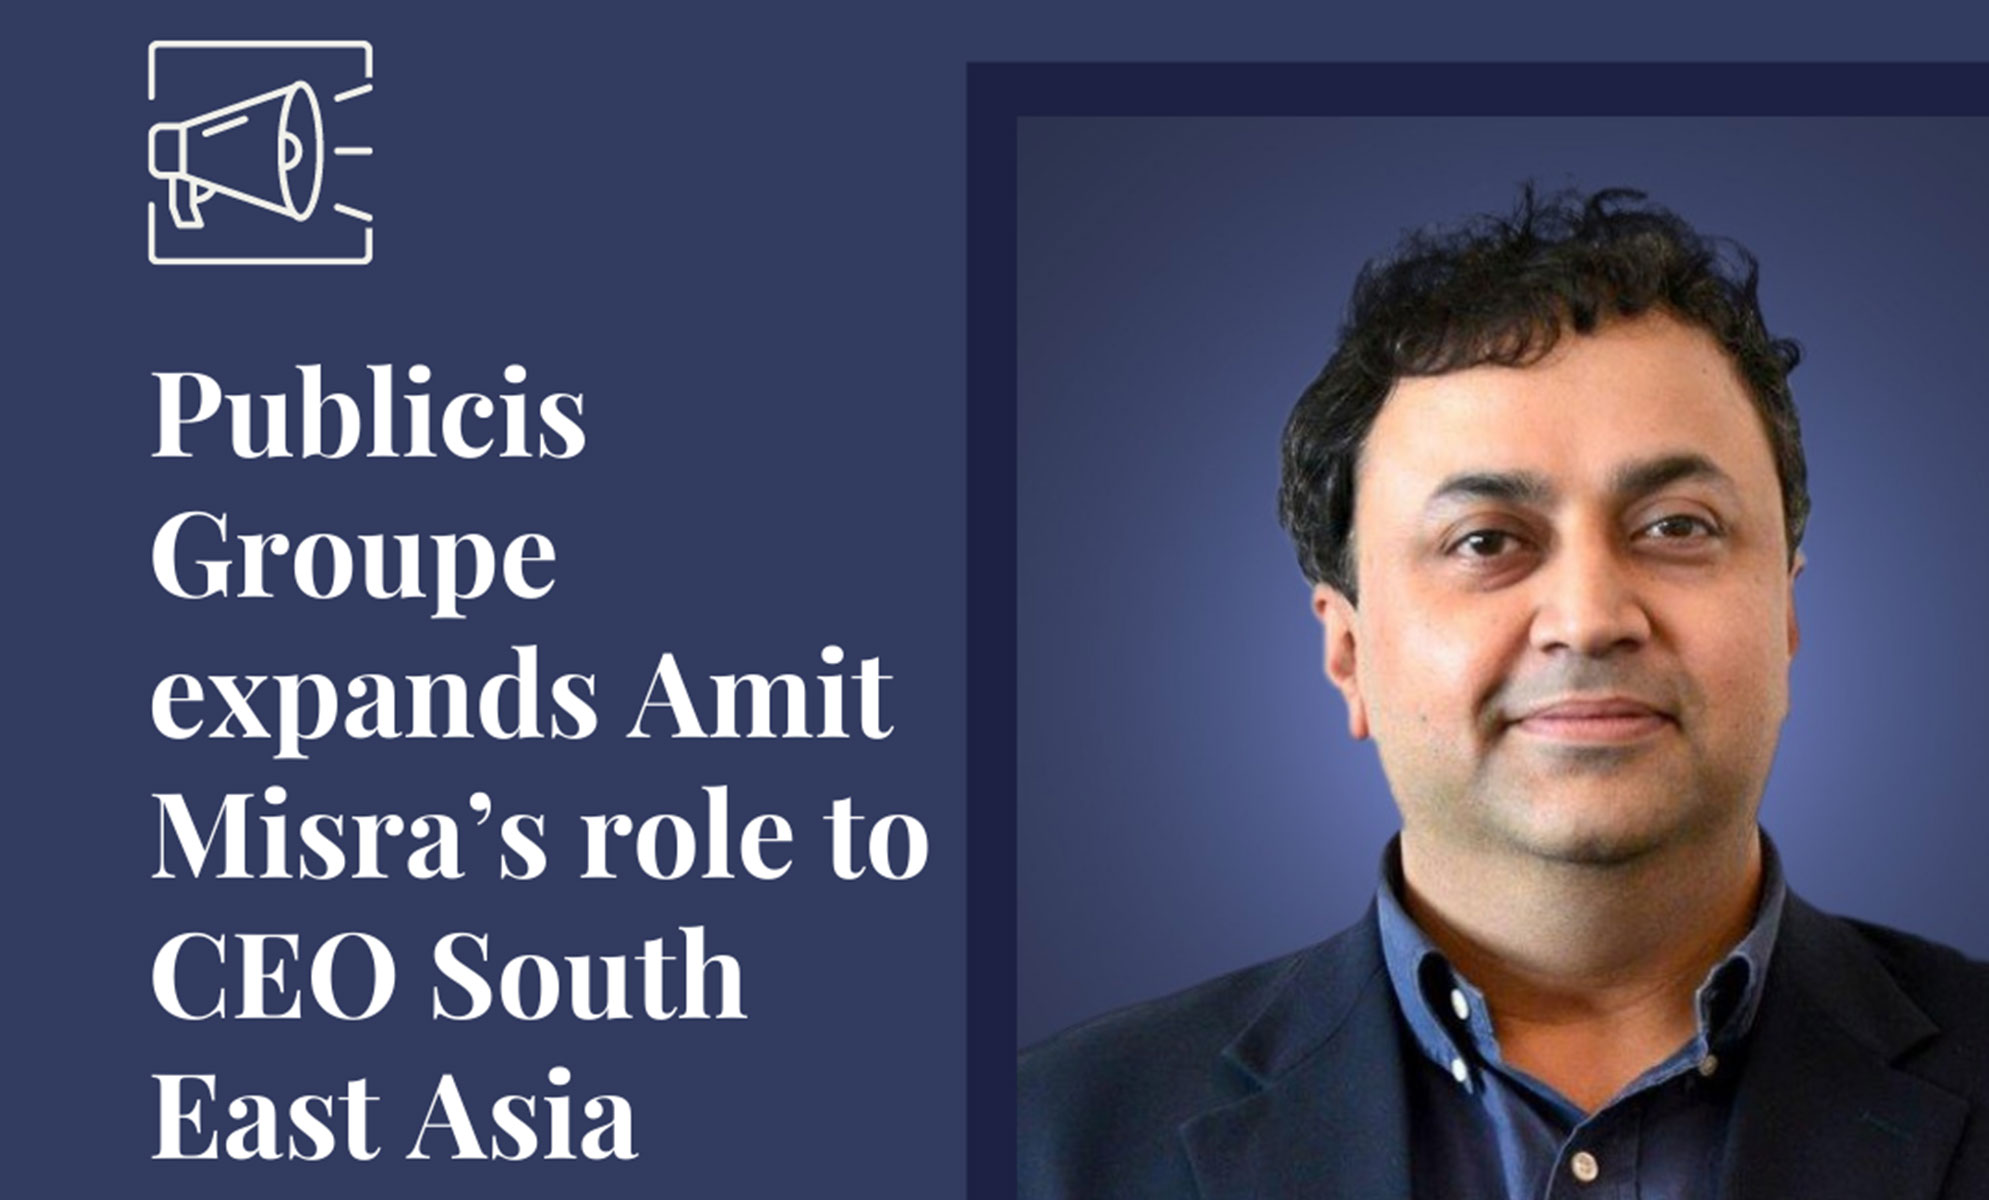 Publicis Groupe expands Amit Misra's role to CEO South East Asia